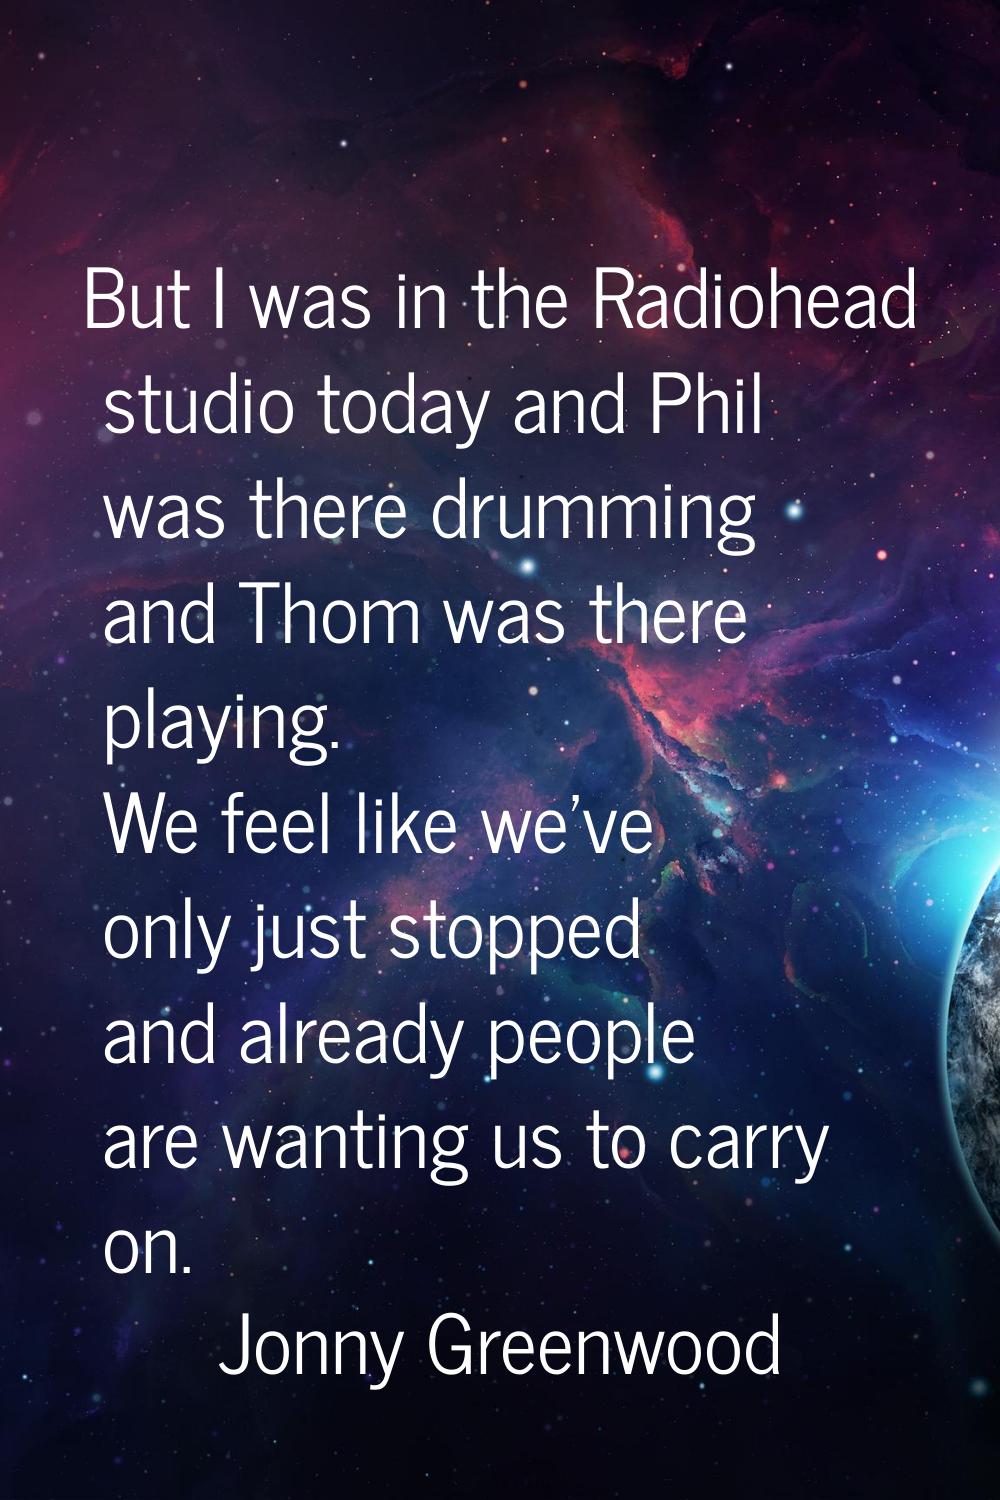 But I was in the Radiohead studio today and Phil was there drumming and Thom was there playing. We 